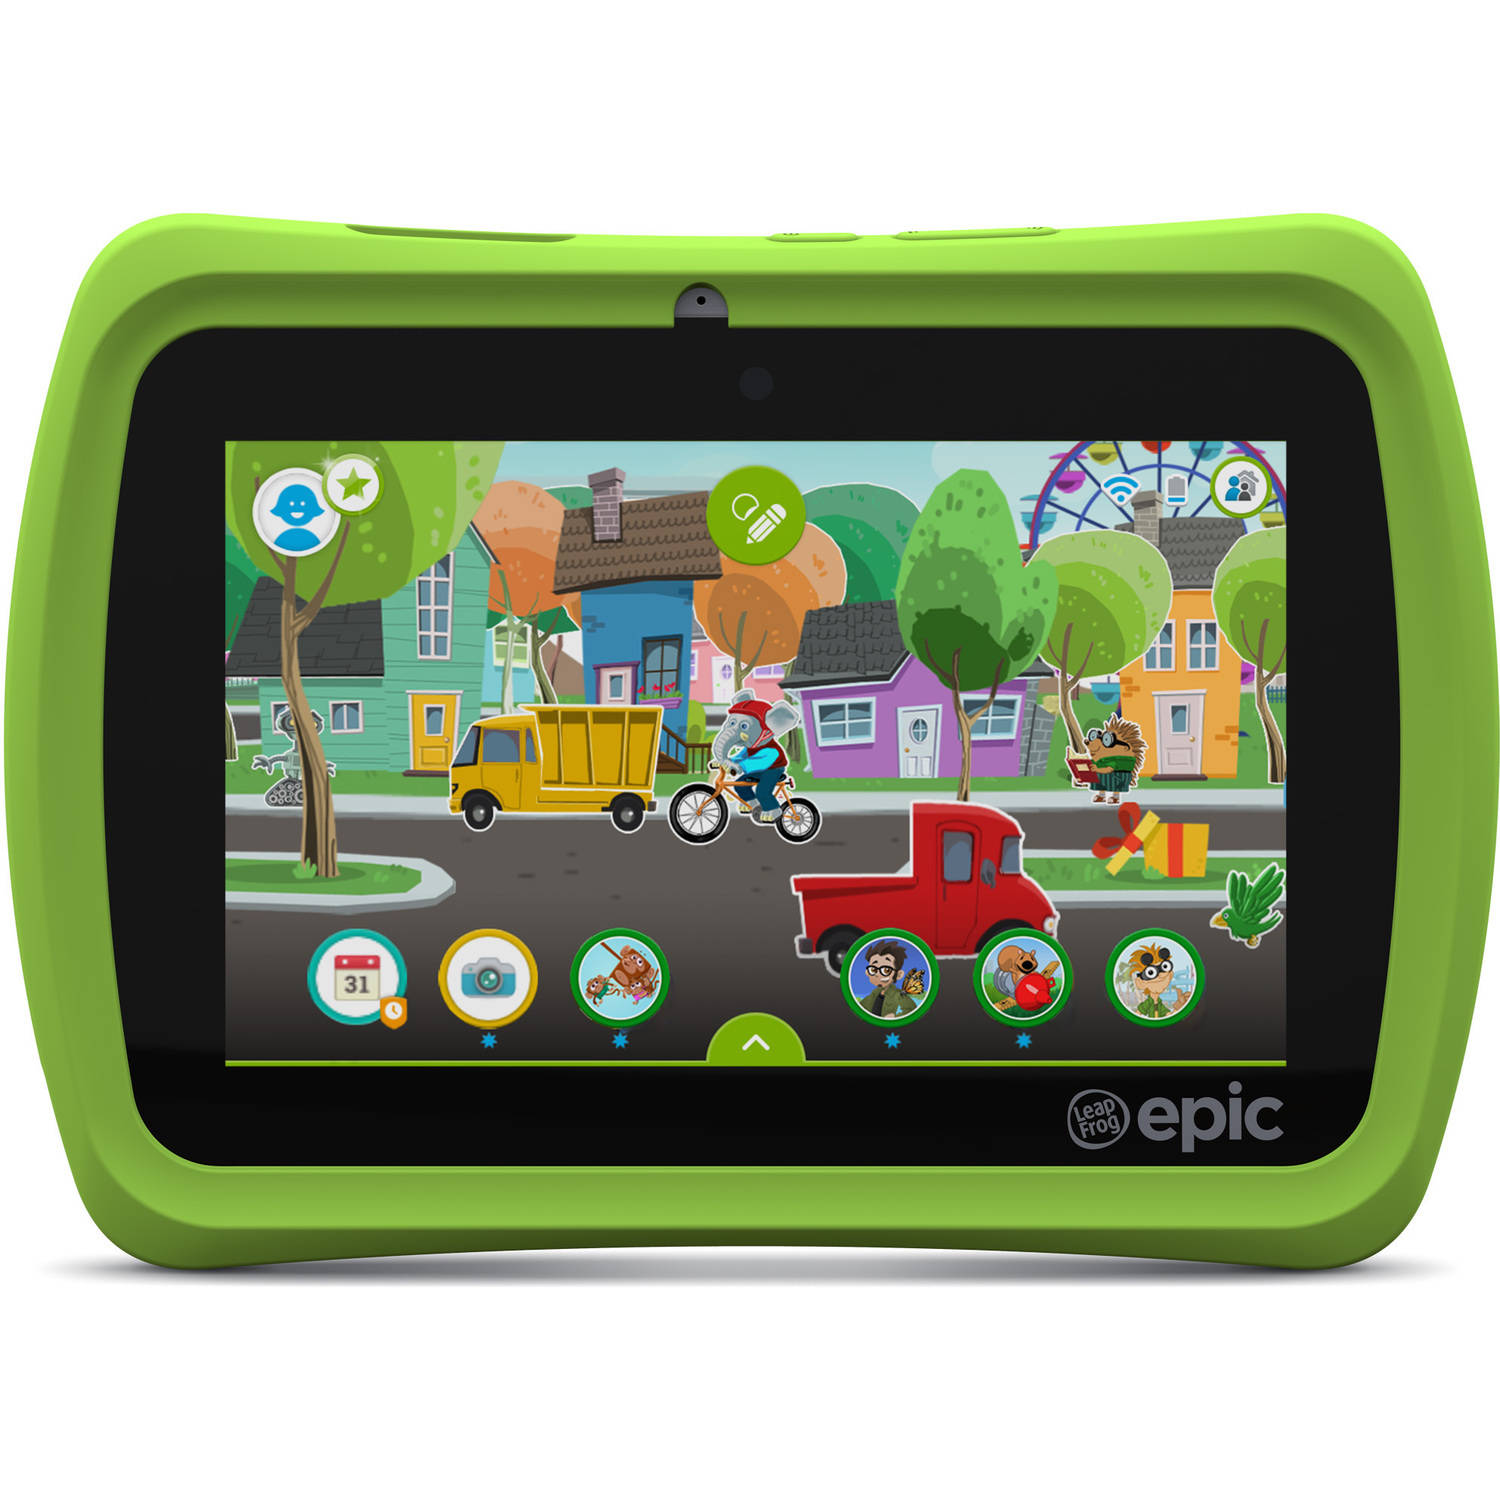 LeapFrog Epic 7" Android-based Kids Tablet 16GB - image 1 of 20